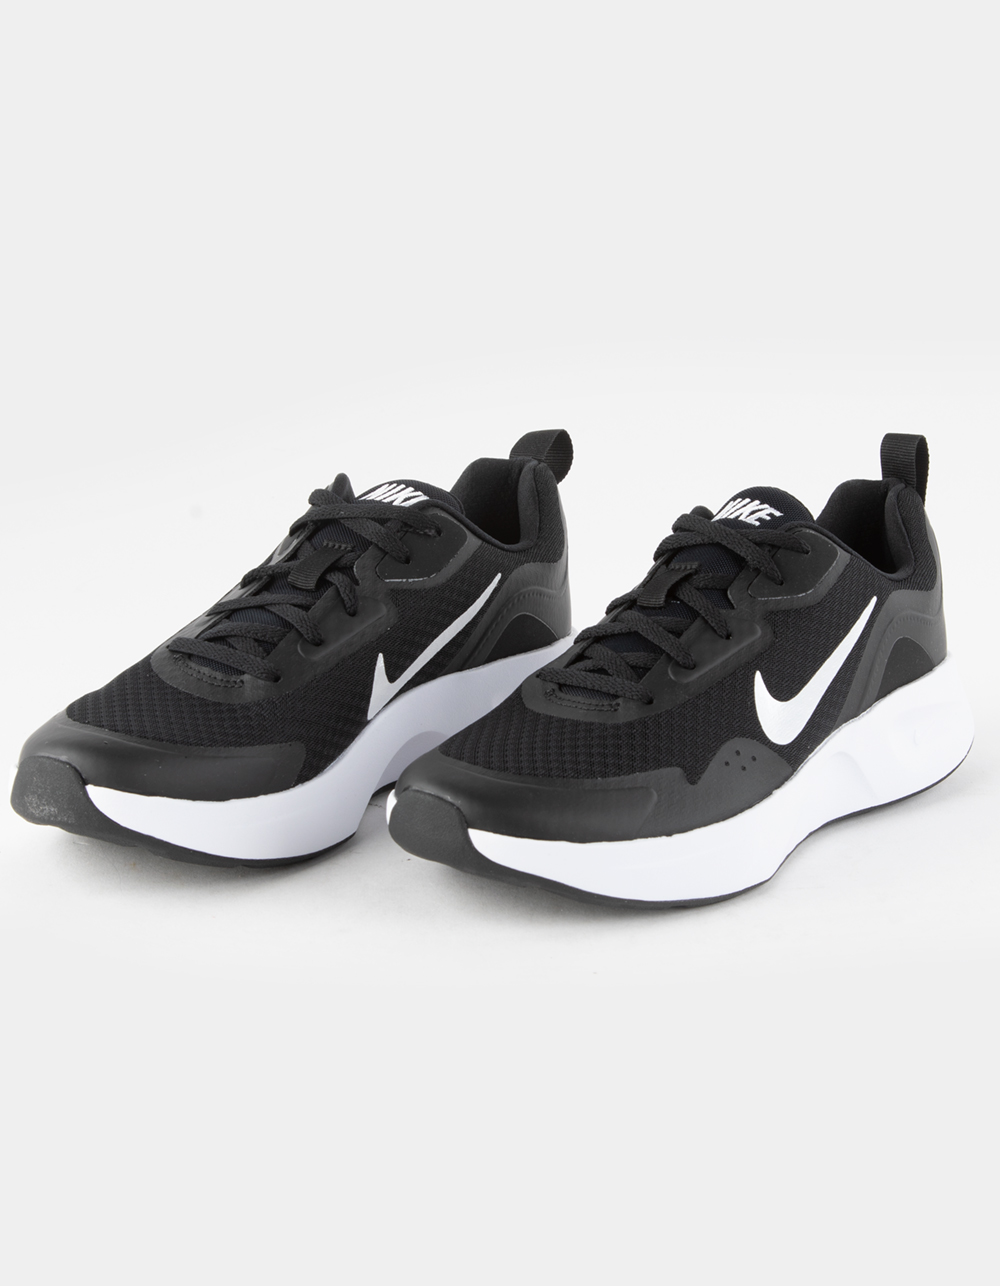 NIKE Wearallday Womens Shoes - BLK/WHT 